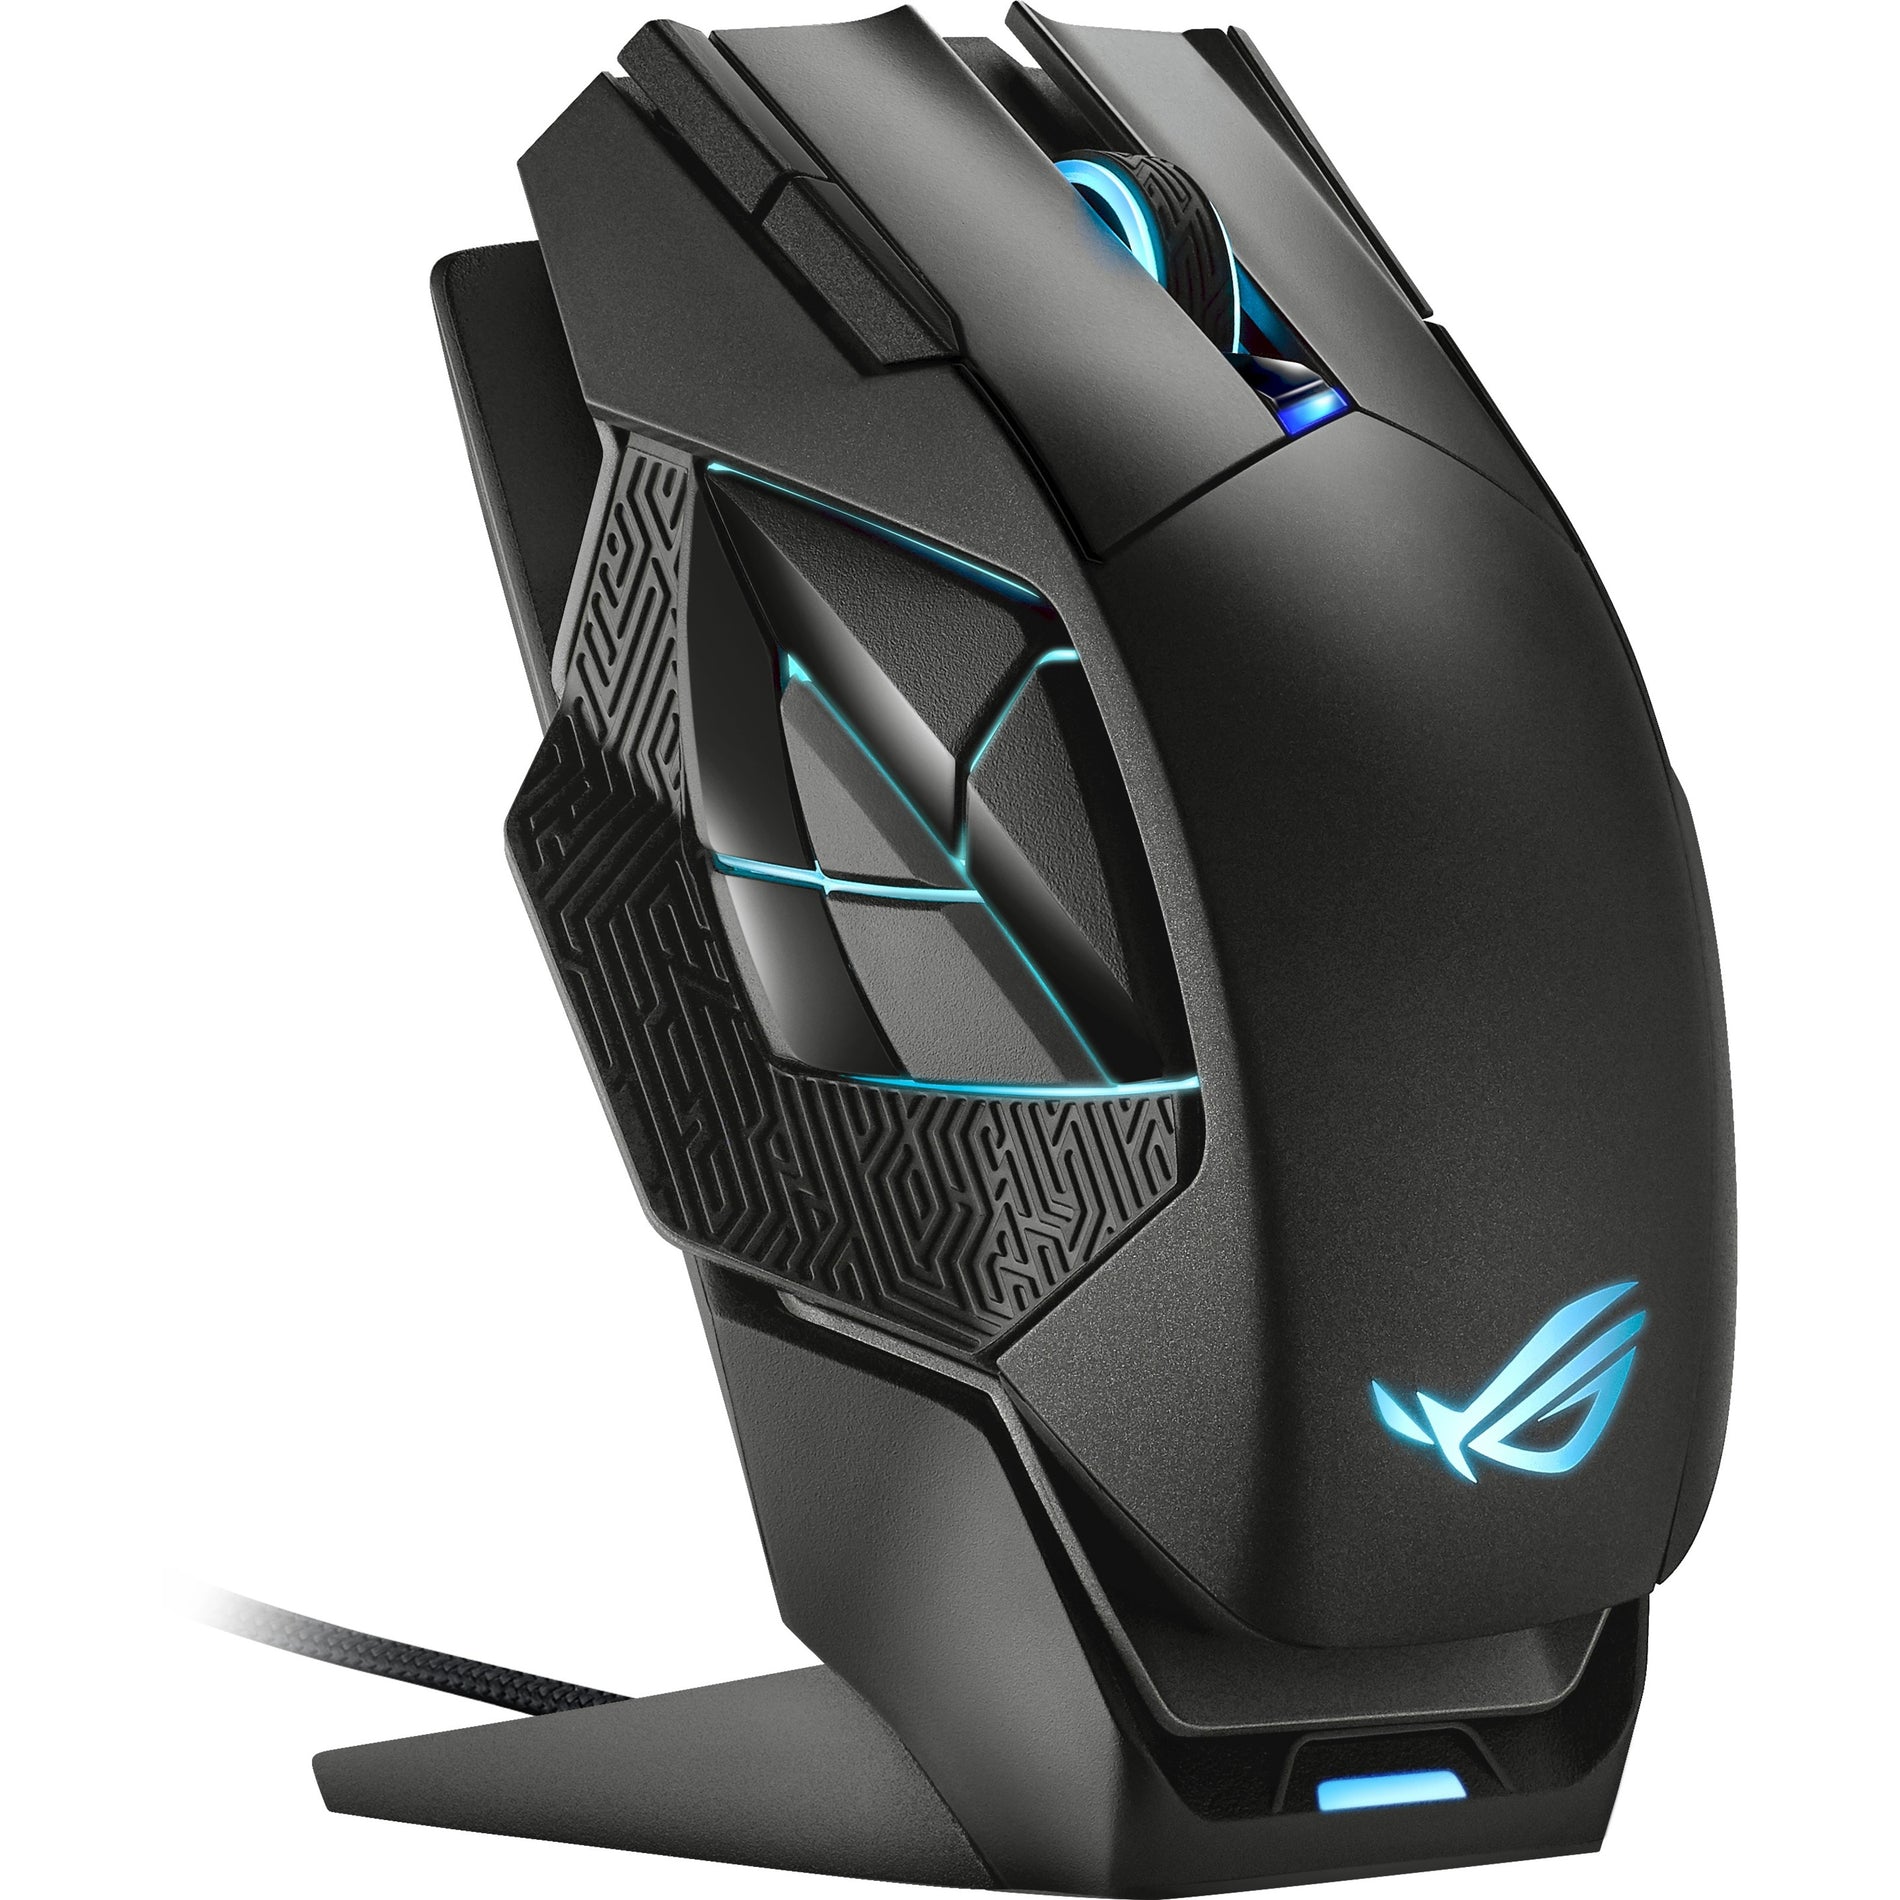 Asus ROG P707 ROG SPATHA X Gaming Mouse, Ergonomic Fit, 19000 dpi, 12 Programmable Buttons, USB Type C